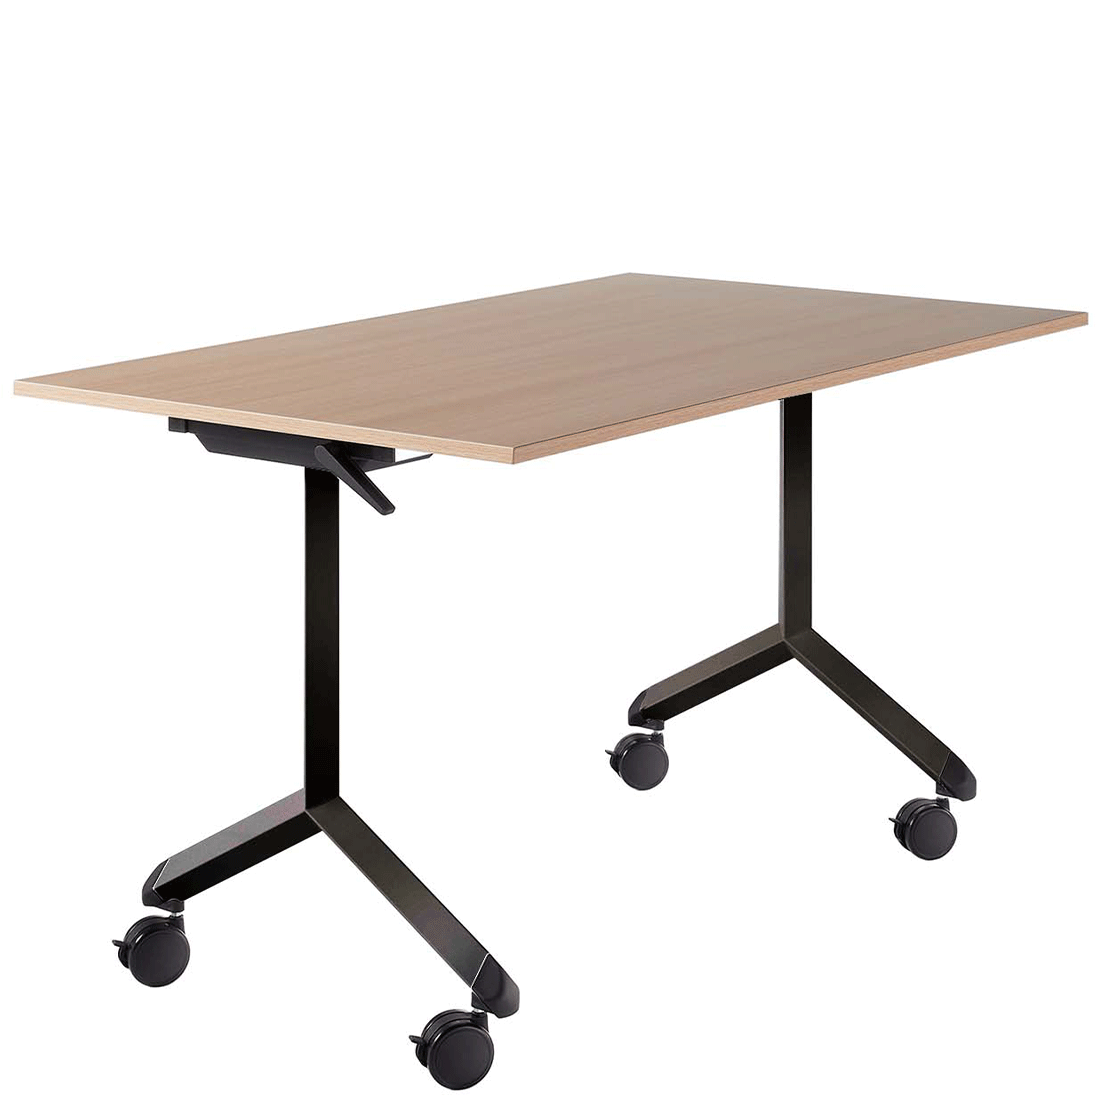 Tipper Table - switchoffice.com.au